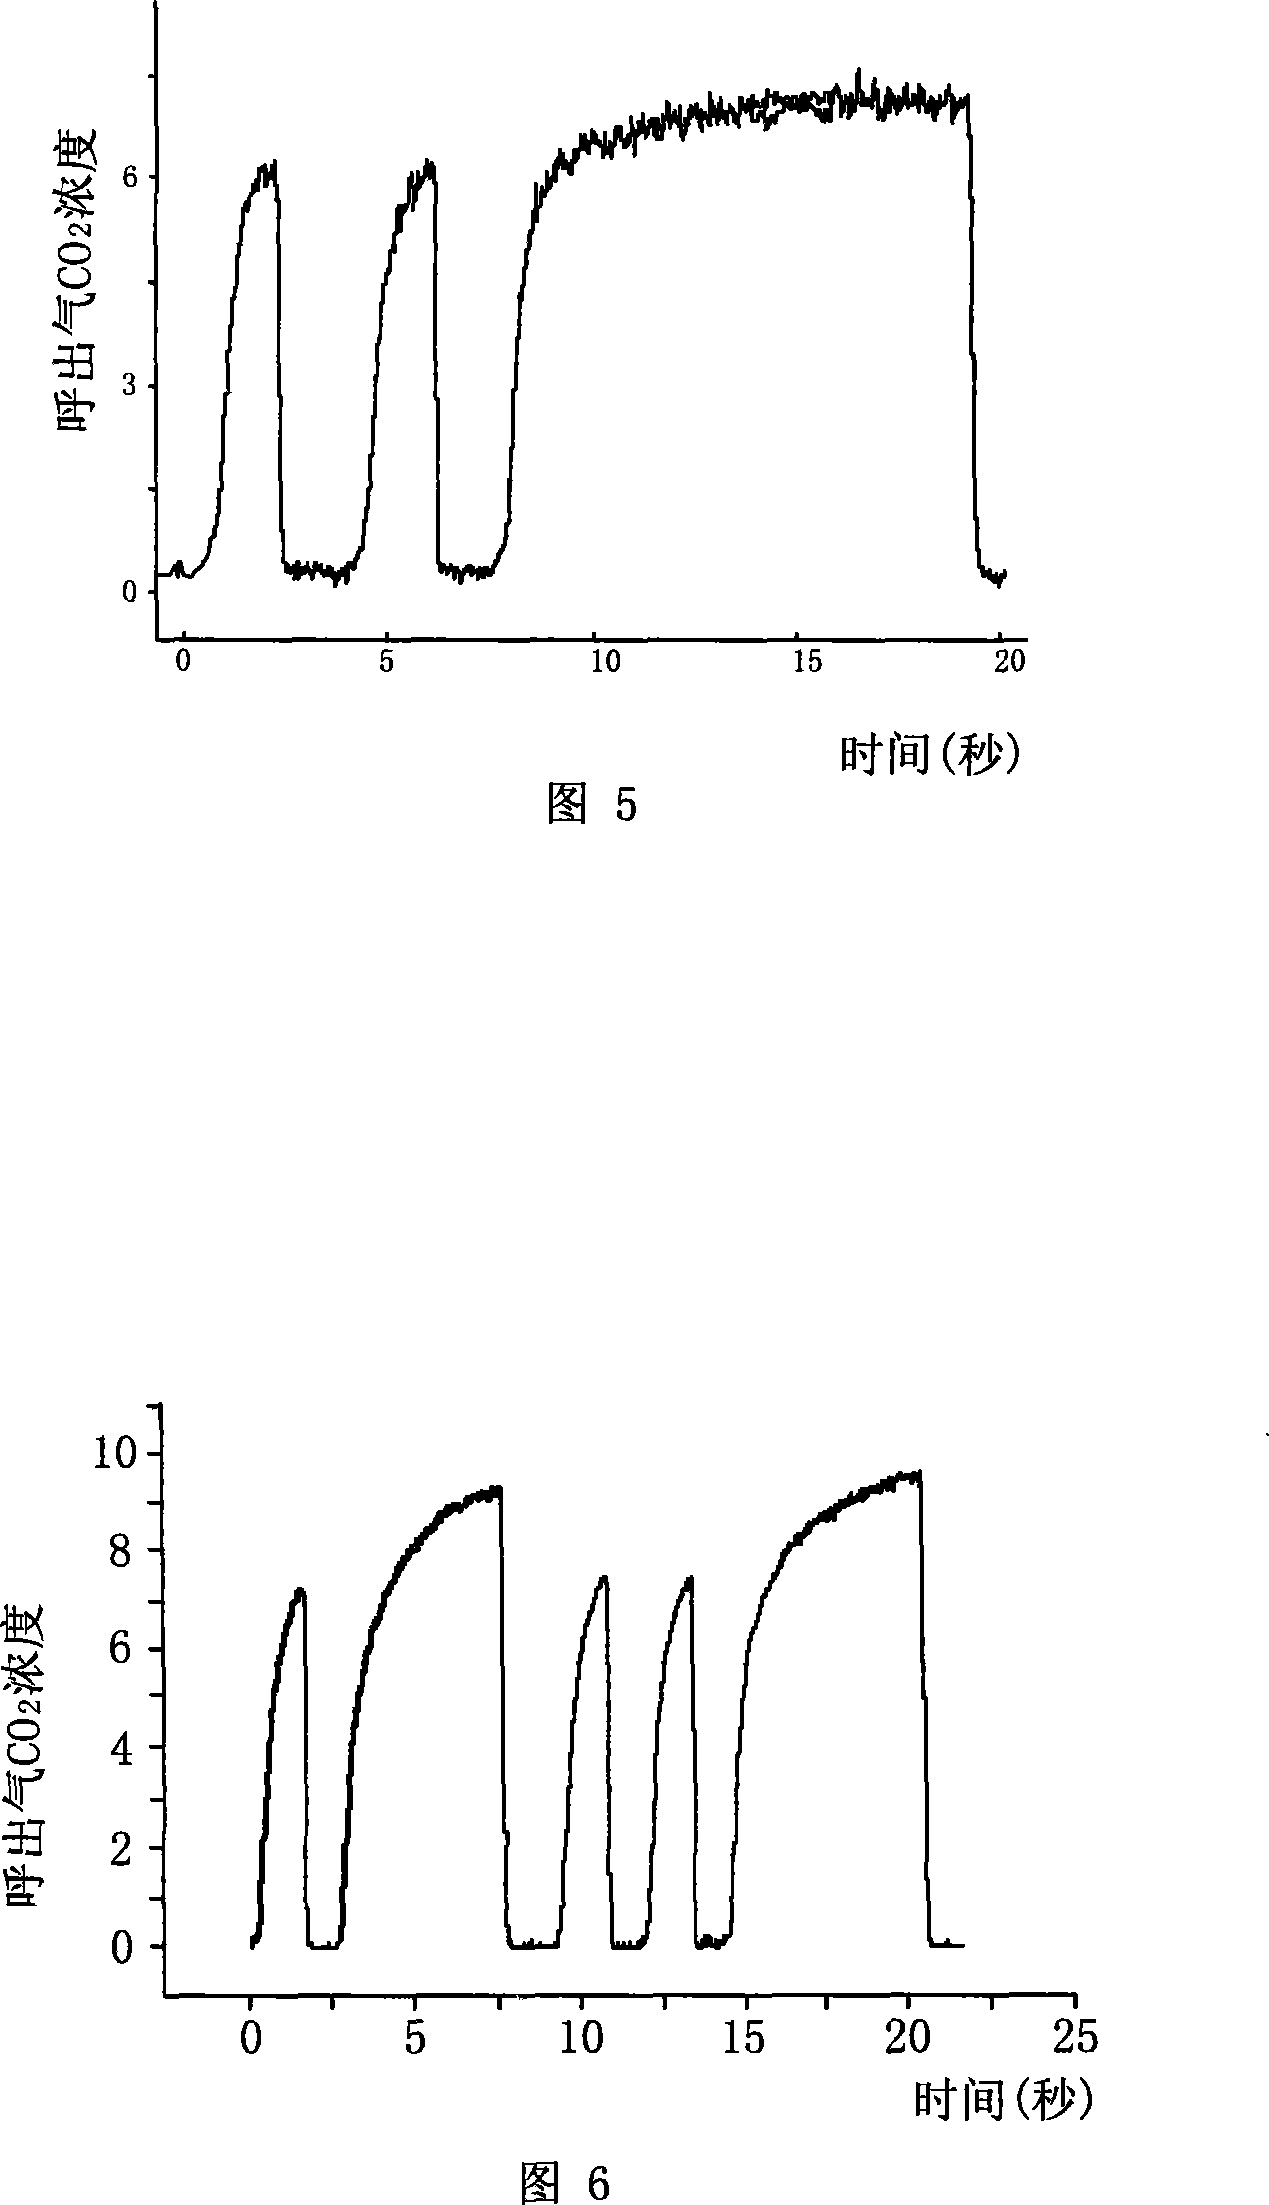 Method and device for pressure dividing monitoring and estimating arterial blood CO2 by using respiratory gas CO2